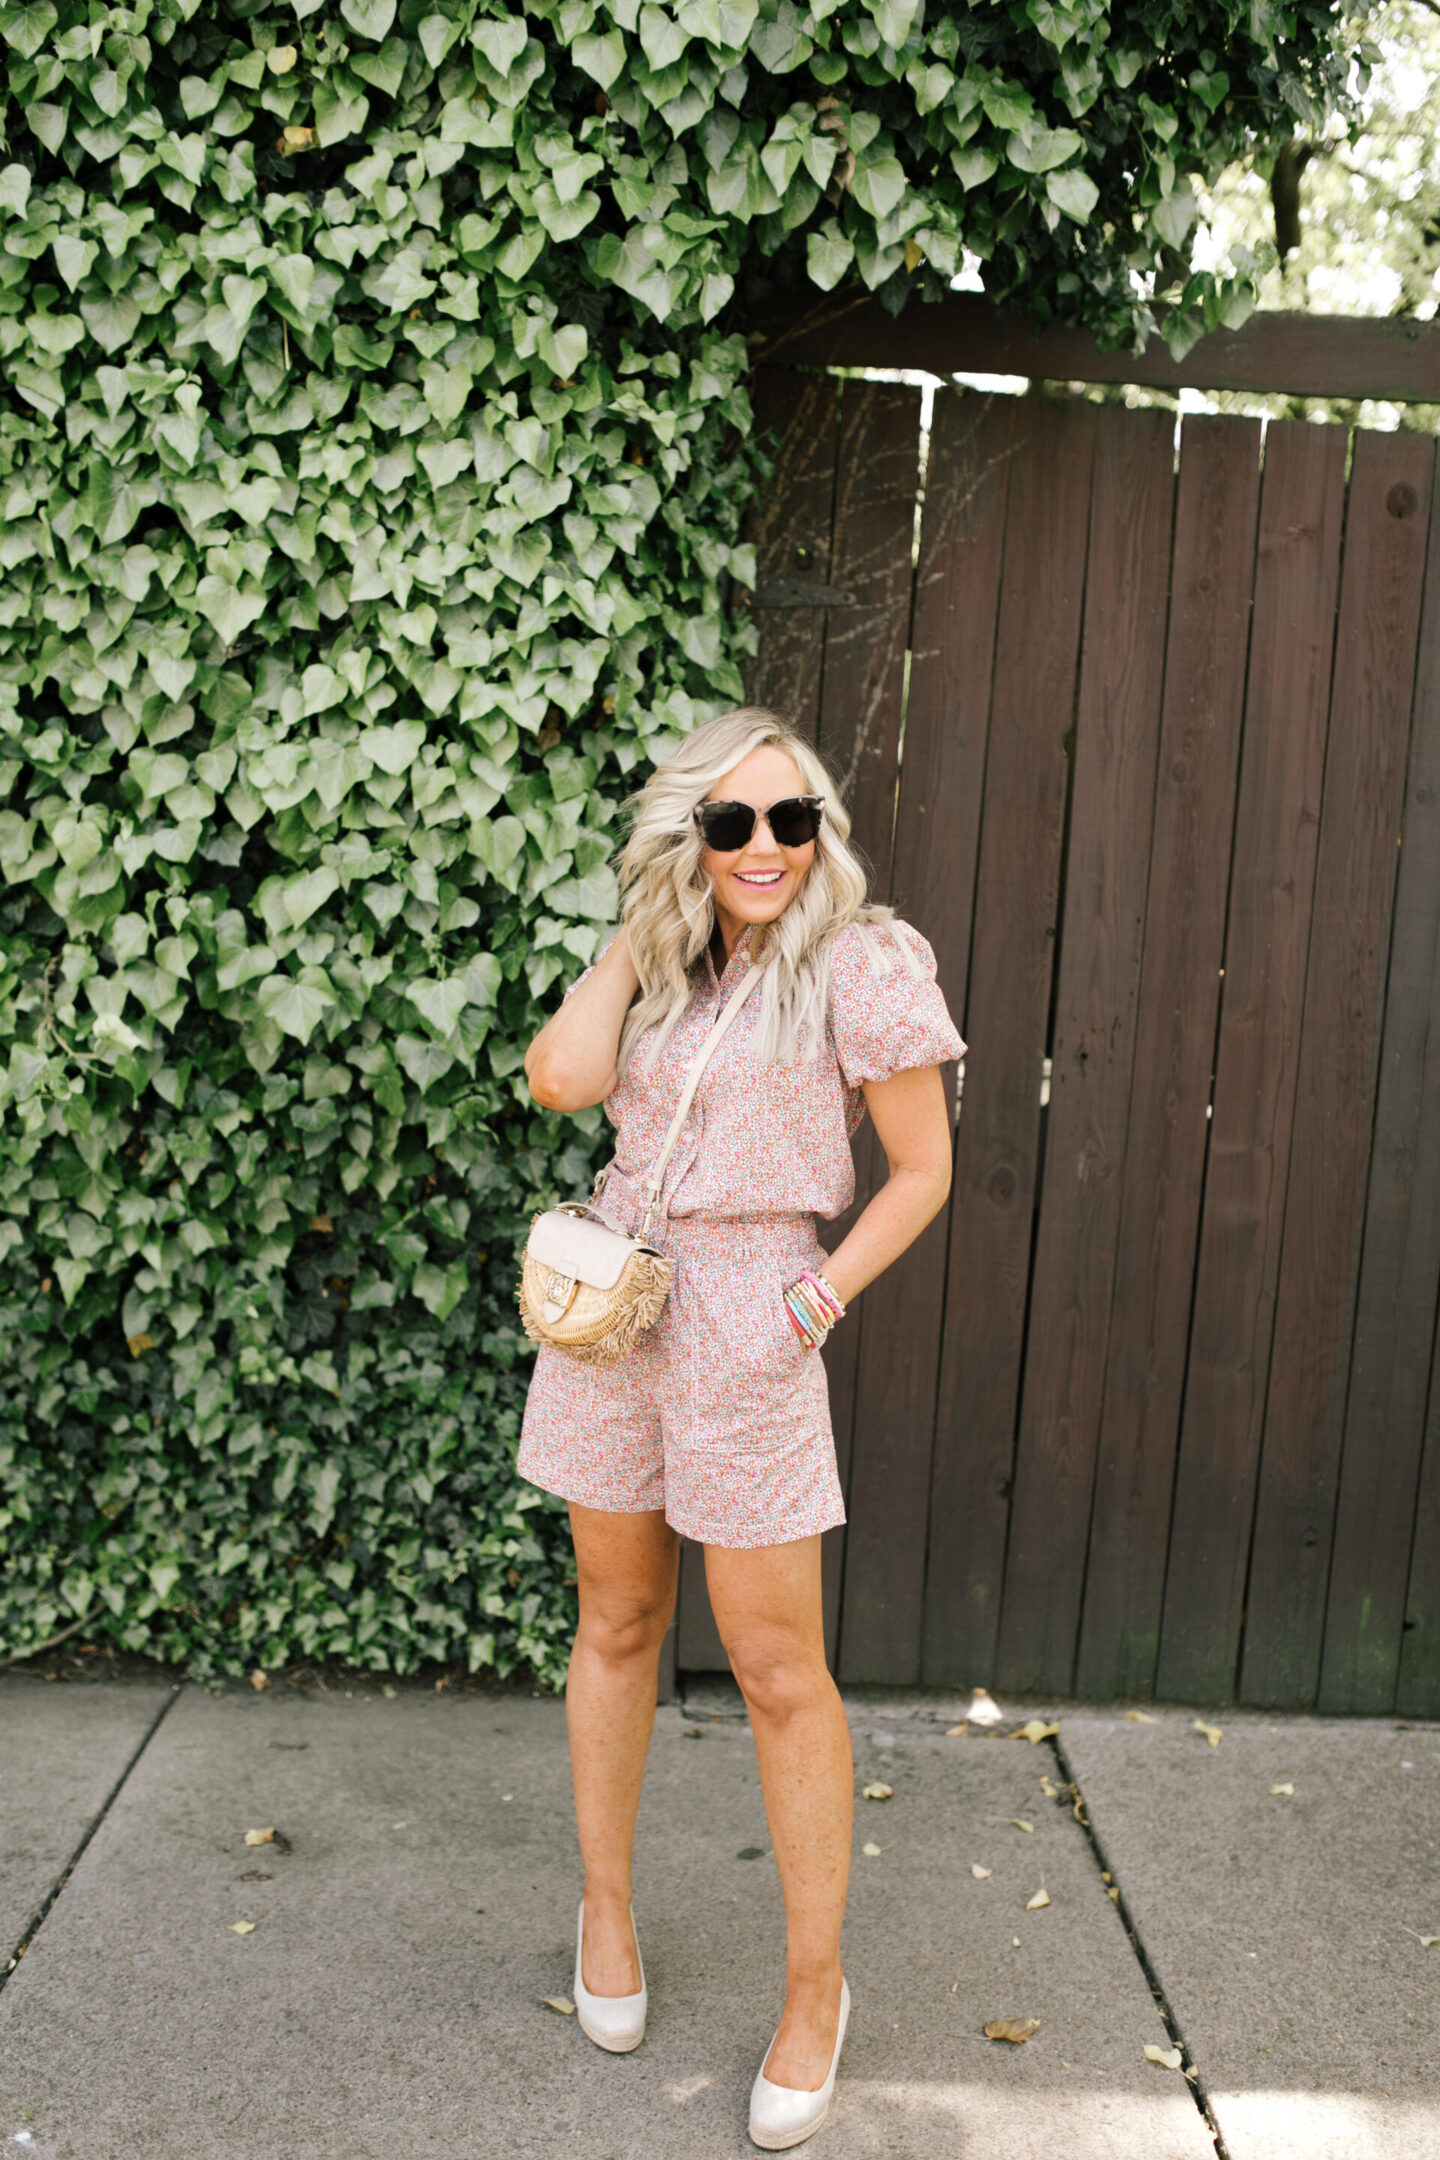 J Crew Clothing by popular Nashville fashion blog, Hello Happiness: image of a woman wearing a J Crew classic fit short sleeve blouse and pull-on camp shorts in Eloise liberty of London print. 